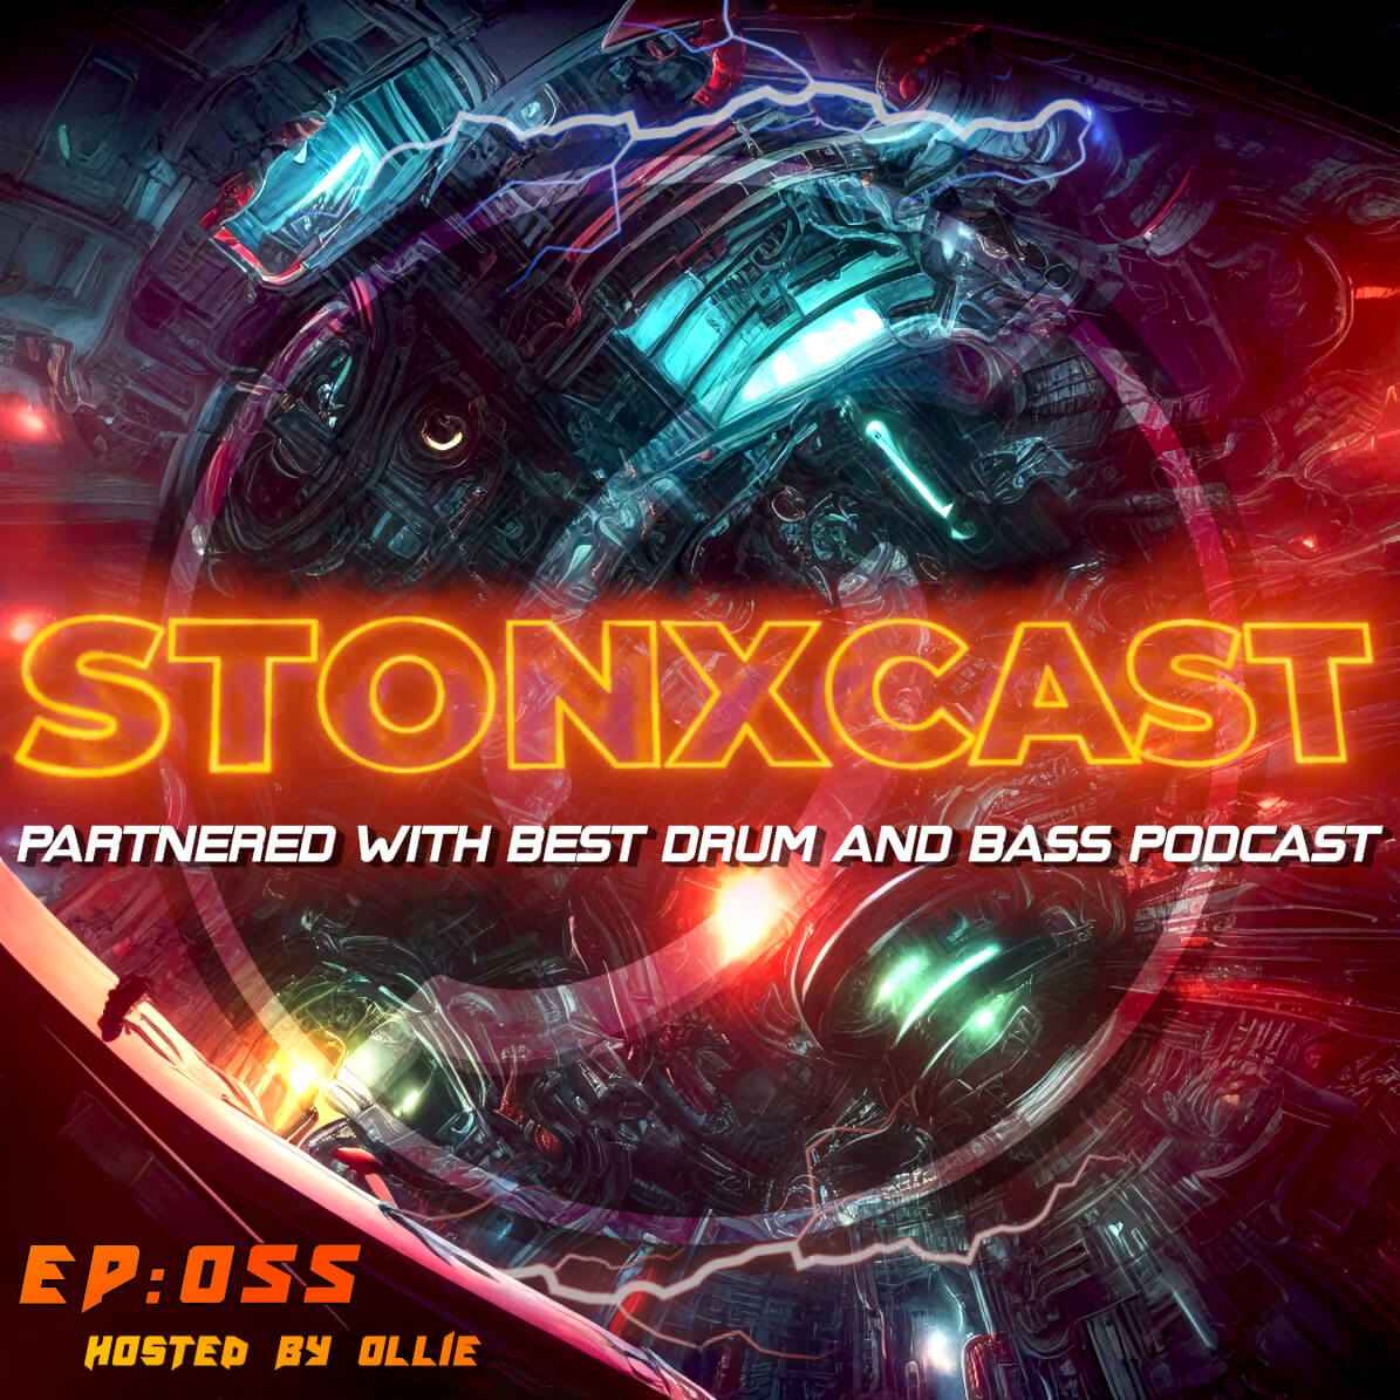 Stonxcast EP:055 - Hosted by Ollie Artwork